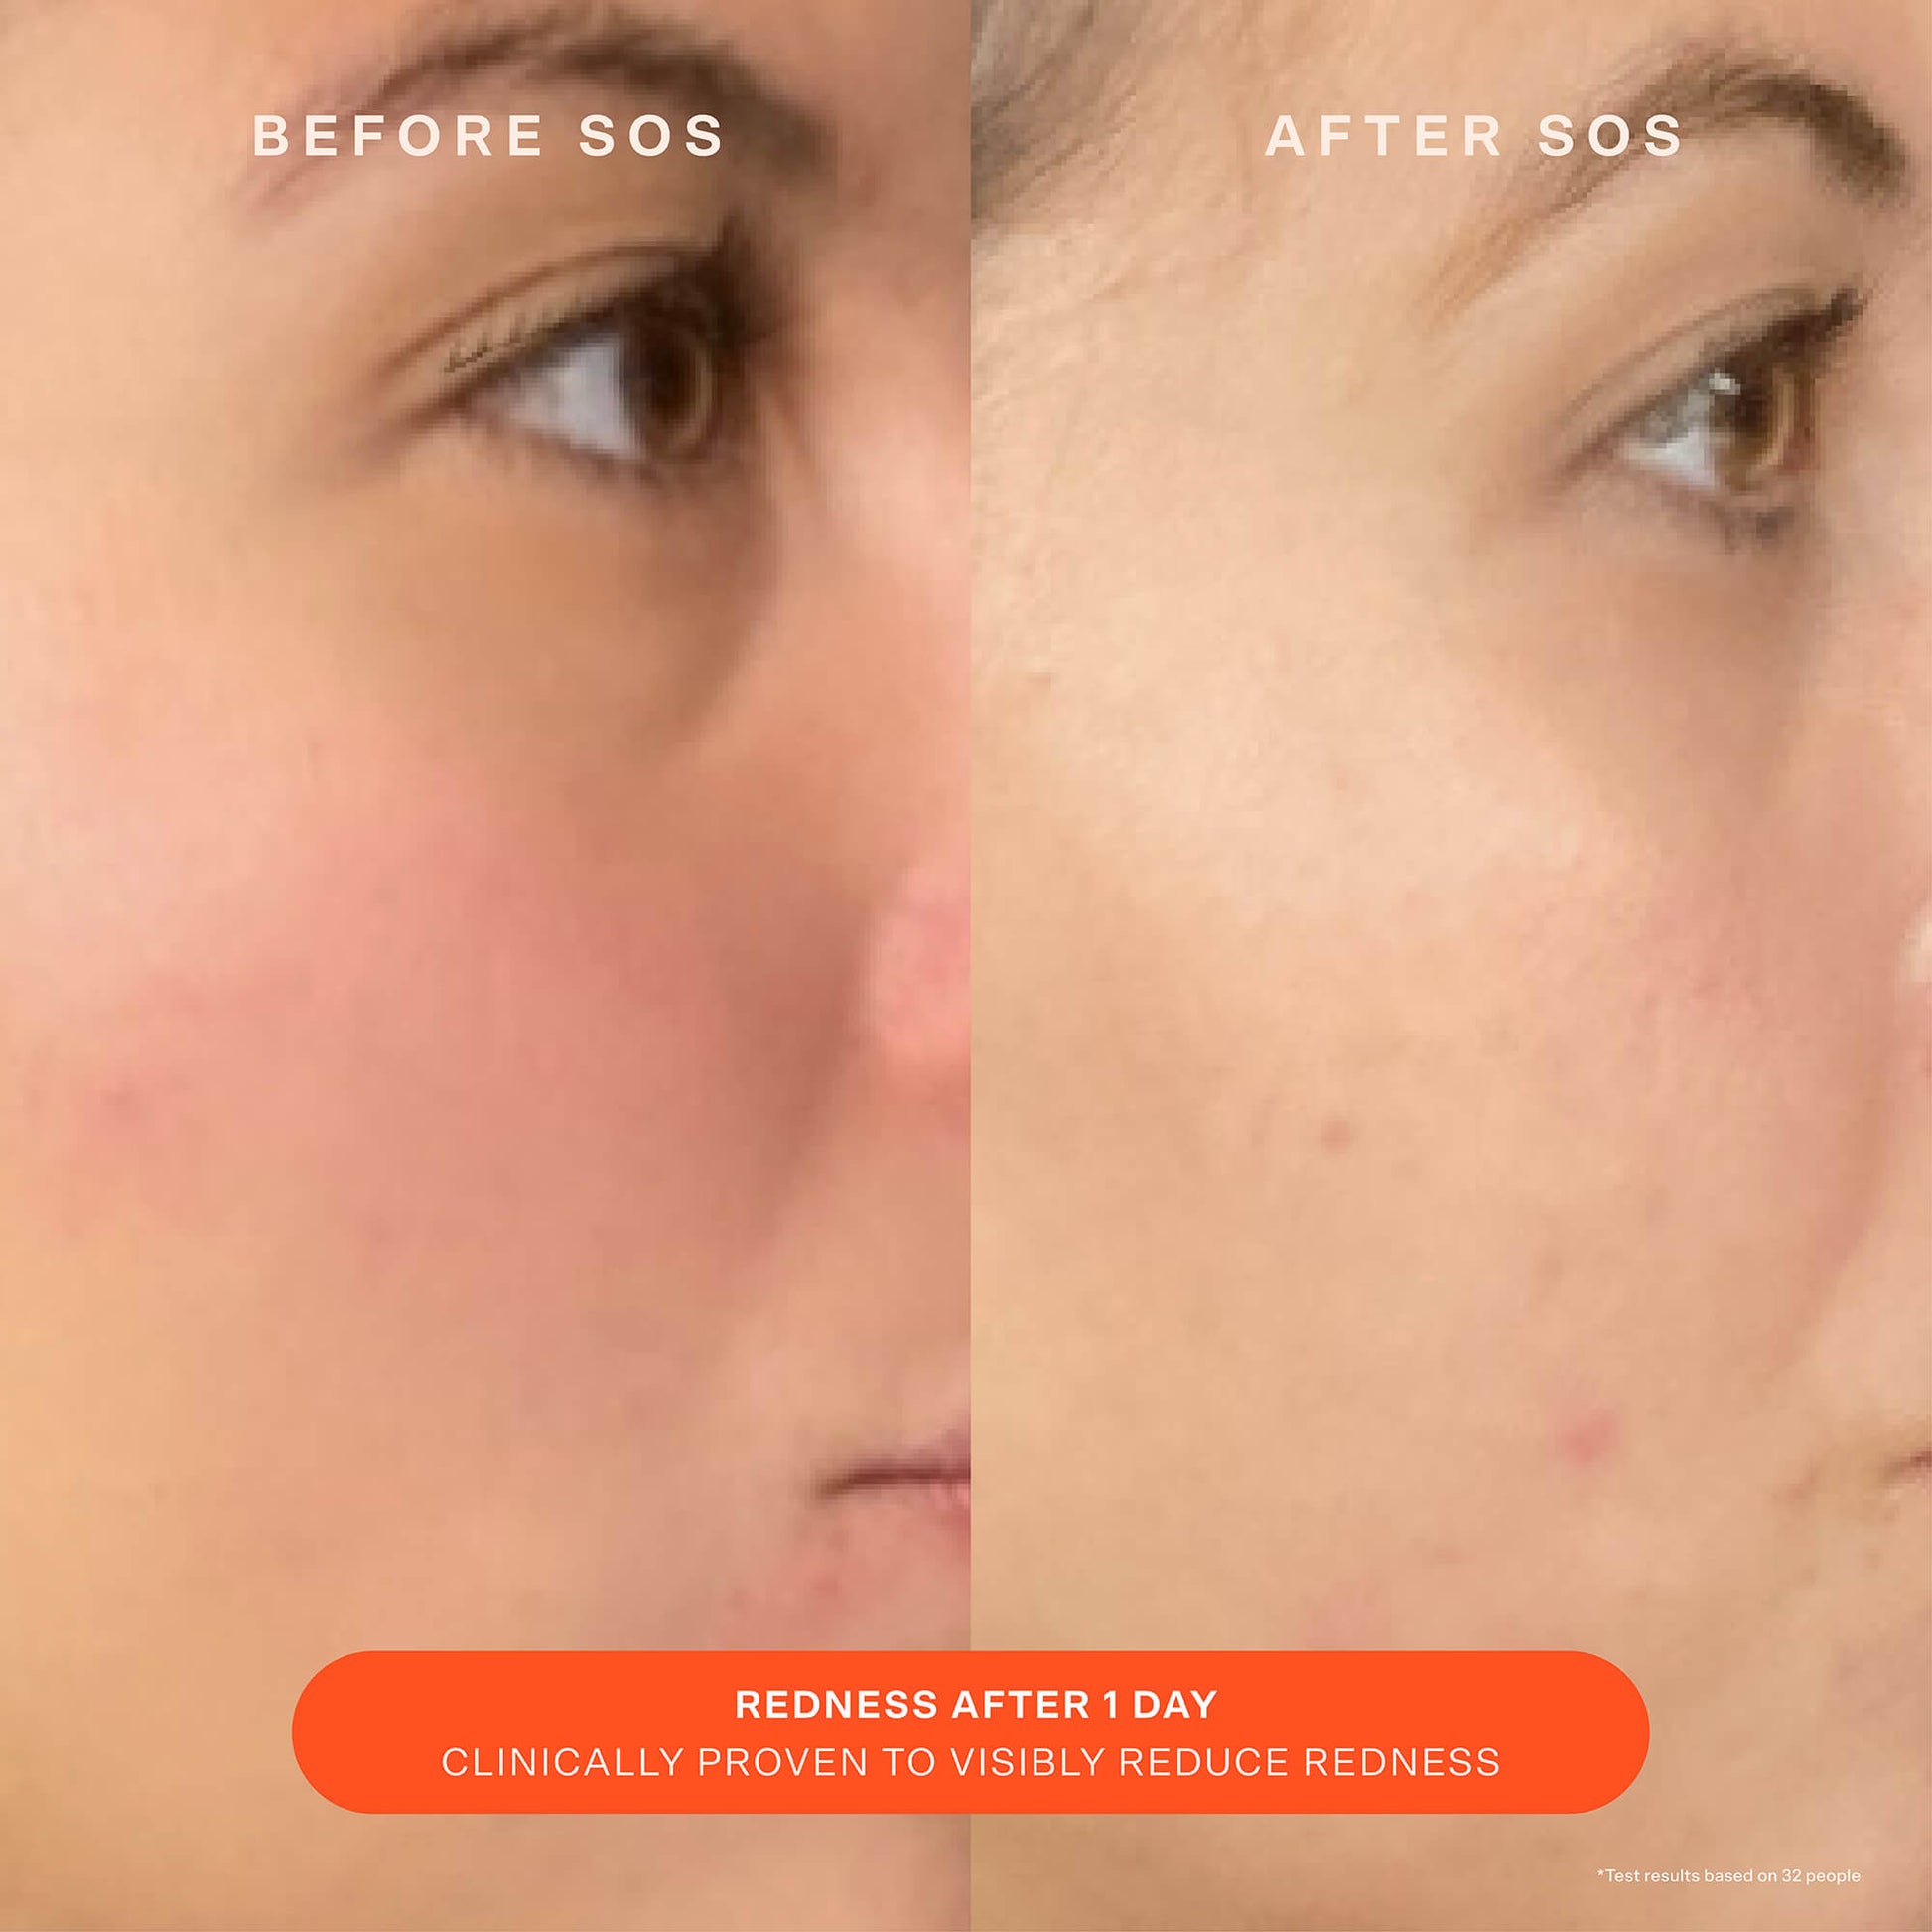 [Shared: A comparison before and after the use of Tower 28 Beauty SOS Recovery Cream. "Redness after 1 day. Clinically proven to visibly reduce redness"